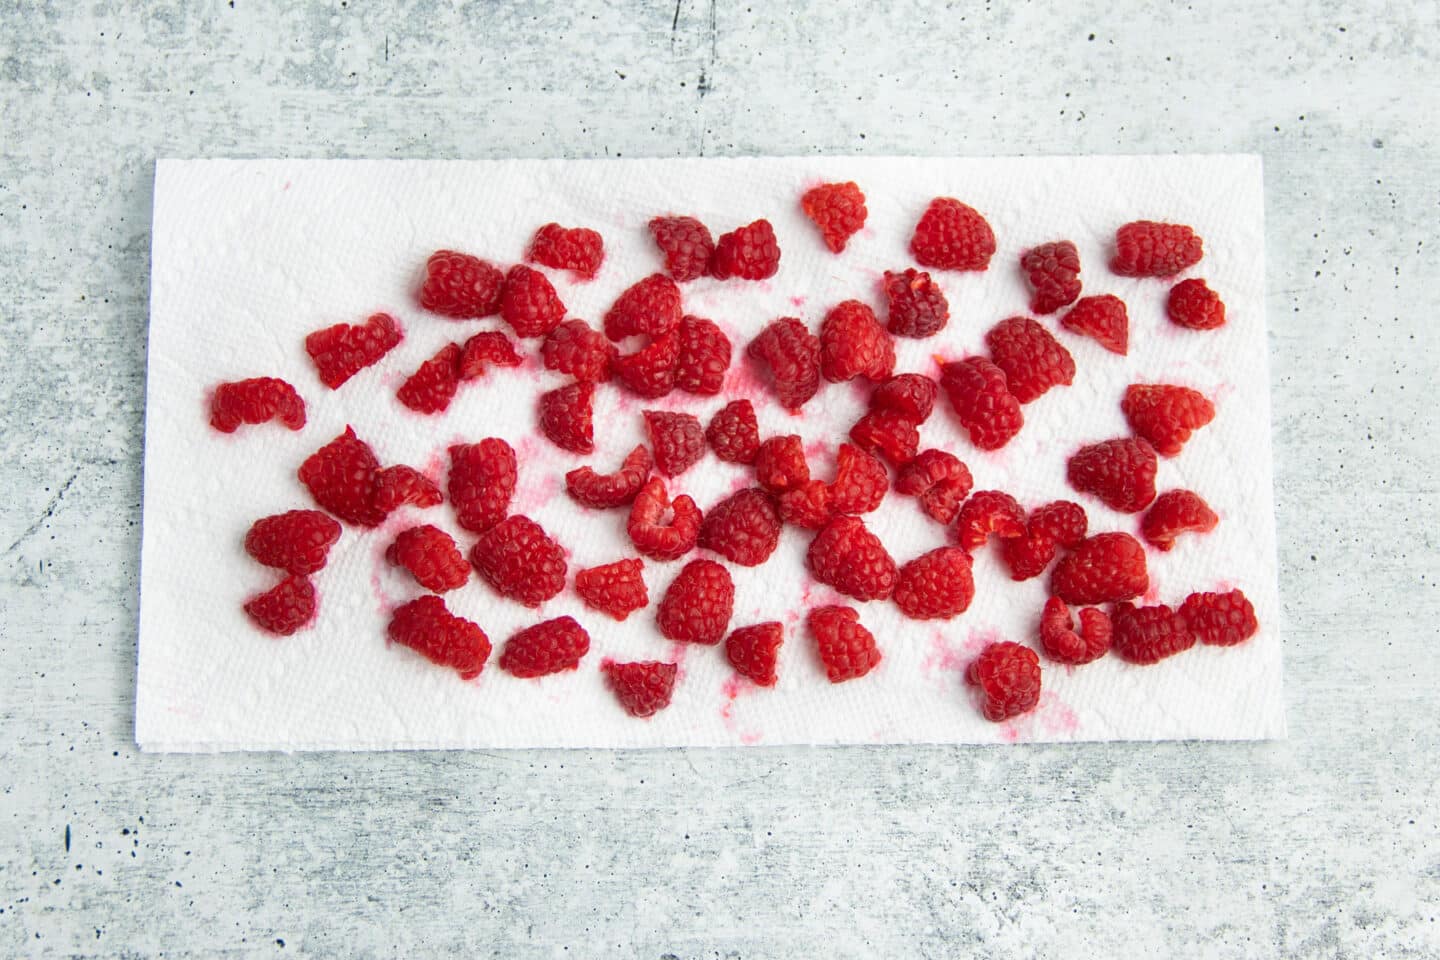 Picture of chopped raspberries on a paper towel.